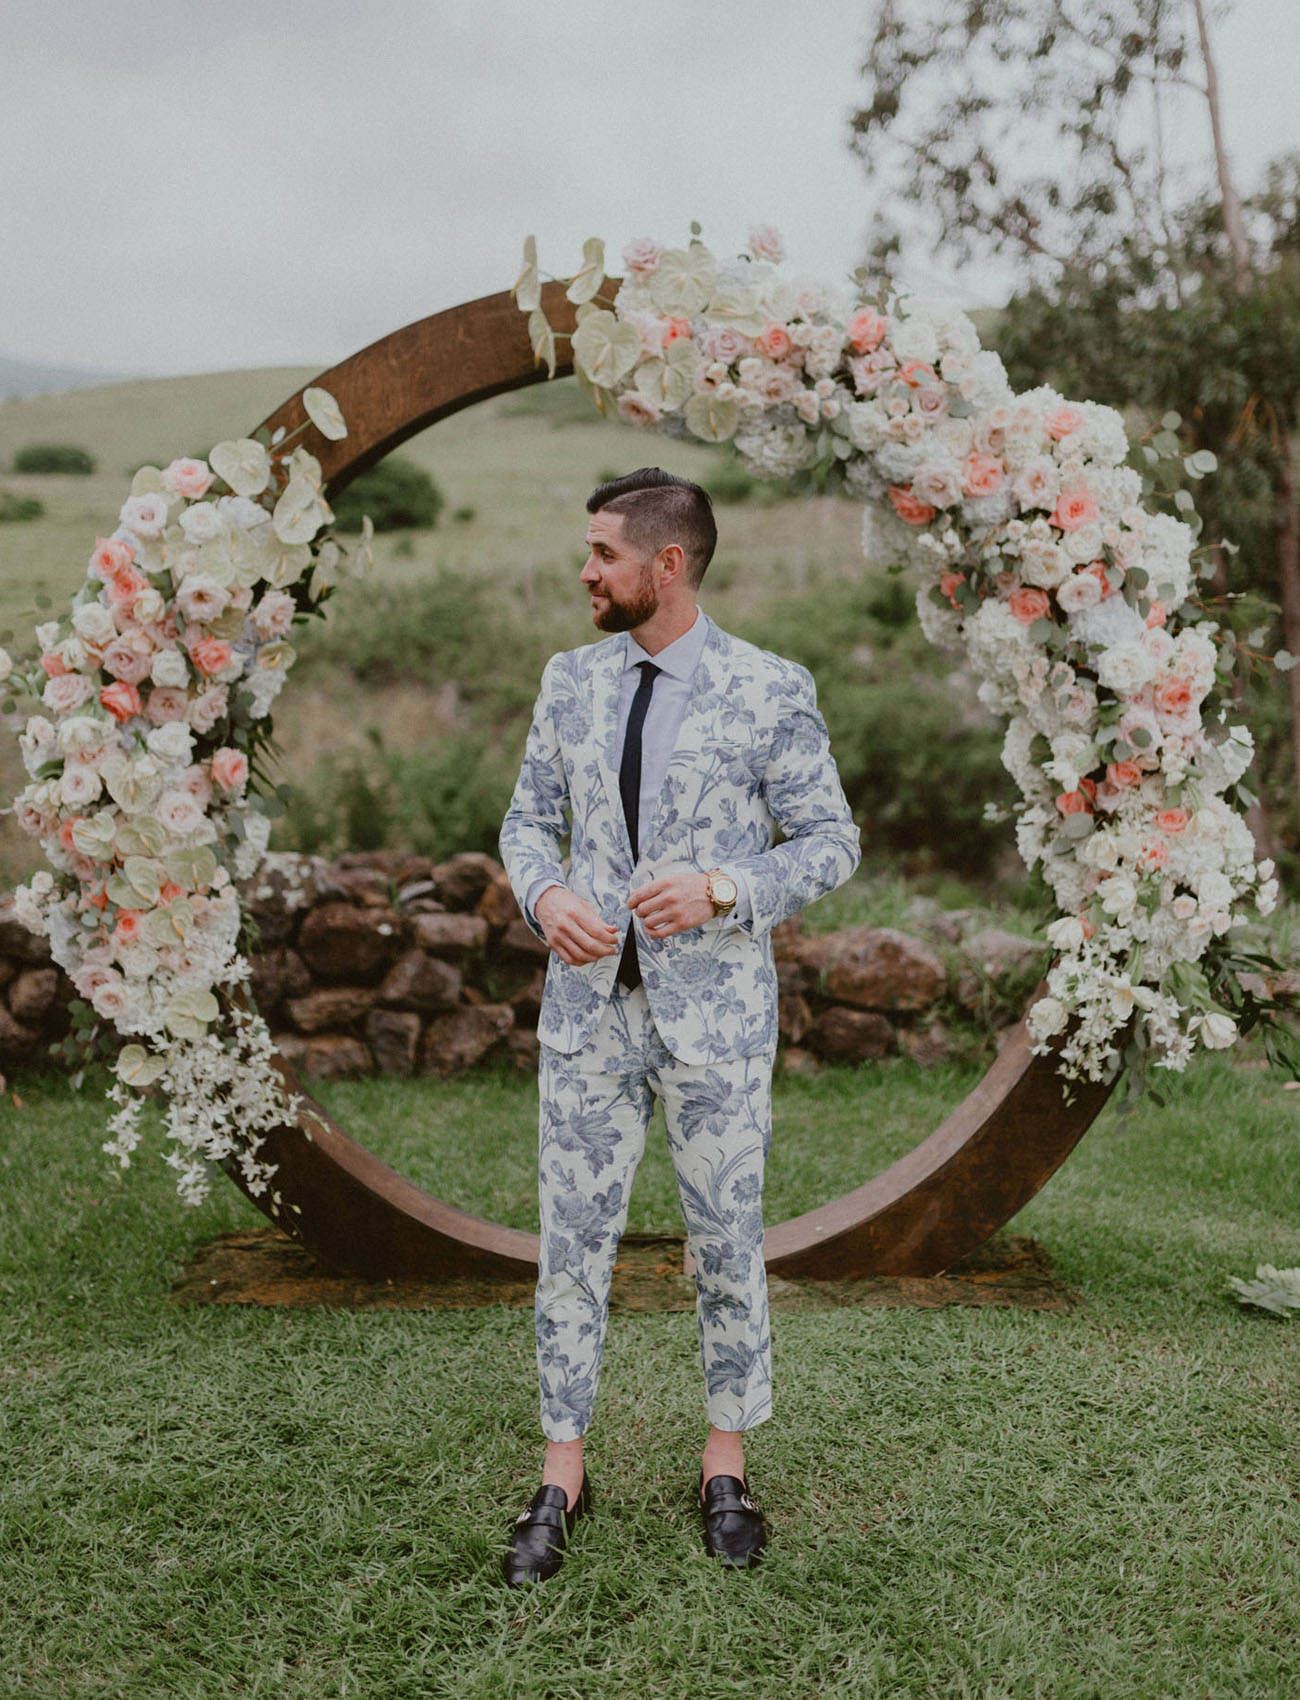 The groom was rocking a blue floral print suit, a white shirt, a black tie and black shoes and looked very daring